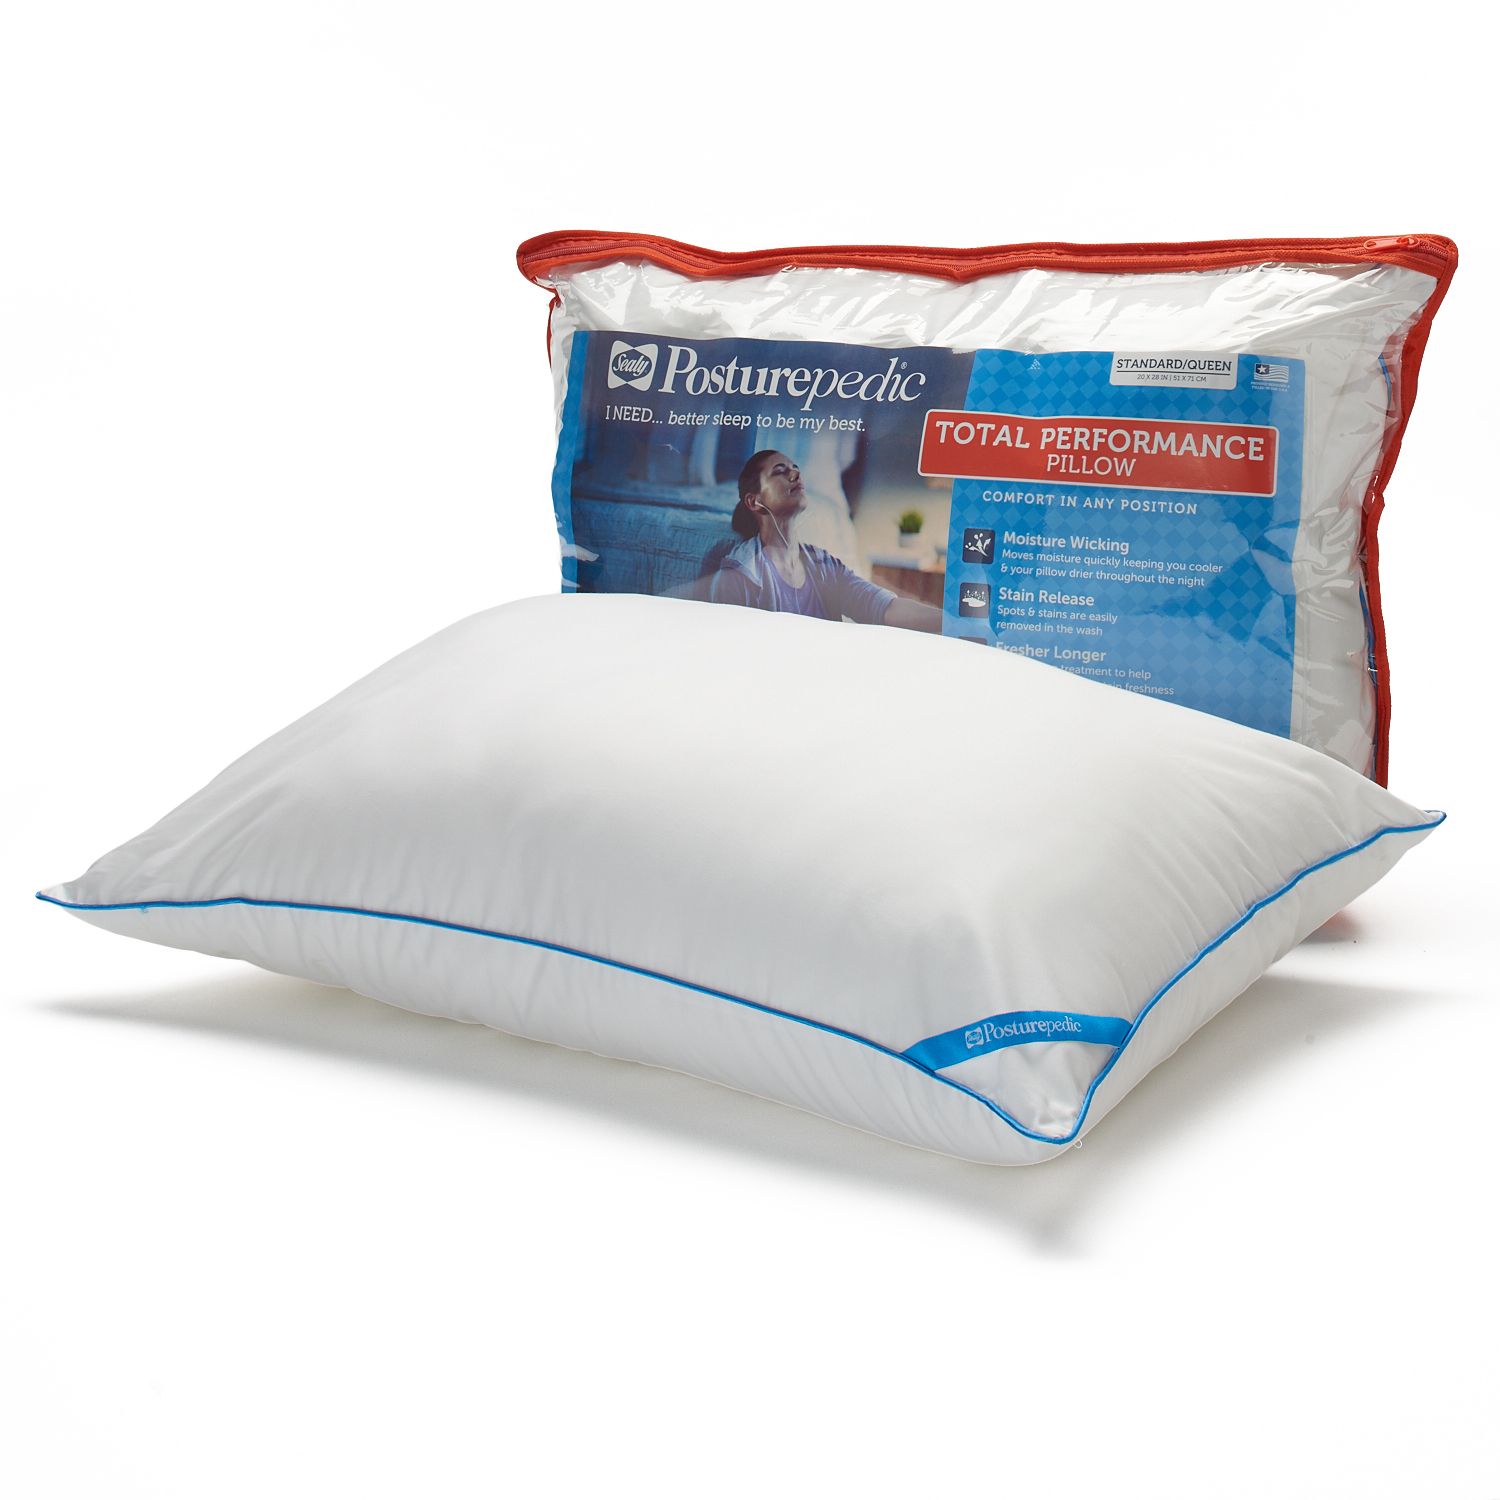 Total Performance Pillow